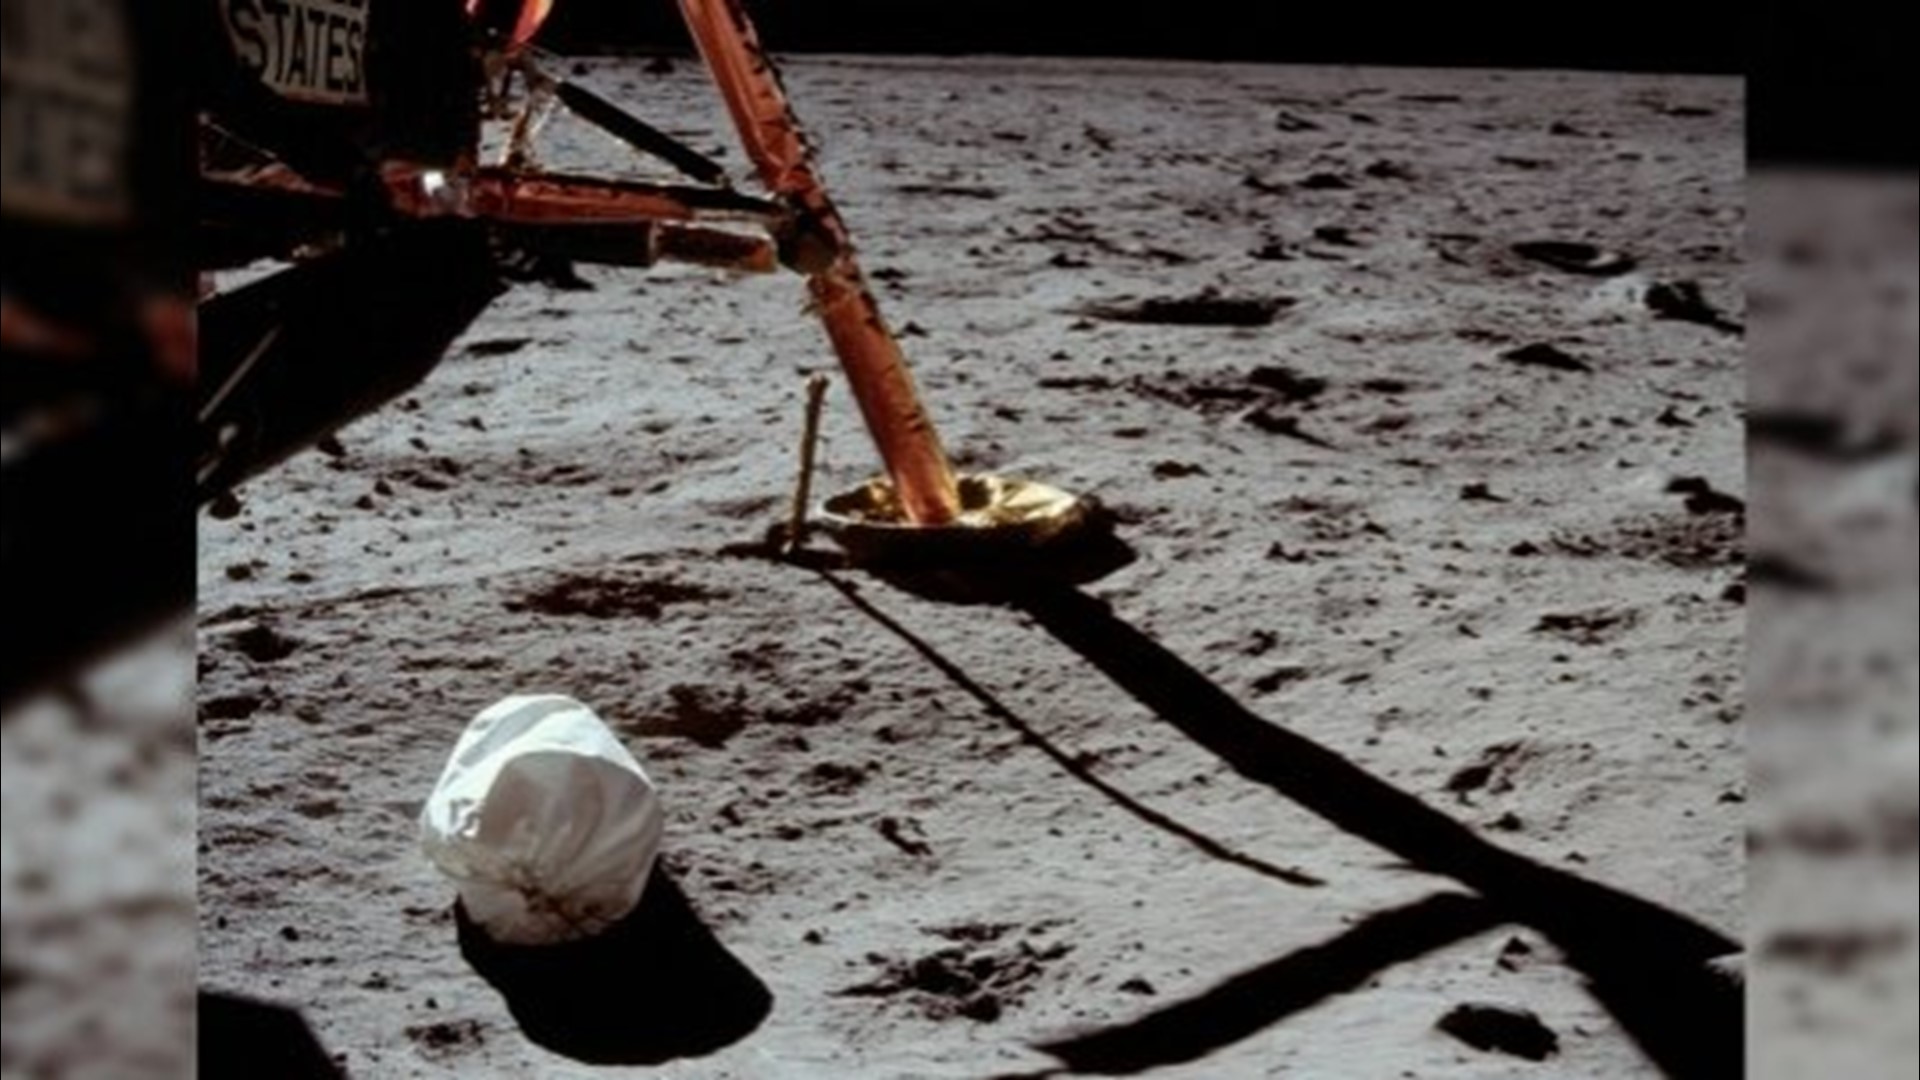 Apparently, we're just as good at littering the lunar surface as we are our own planet.